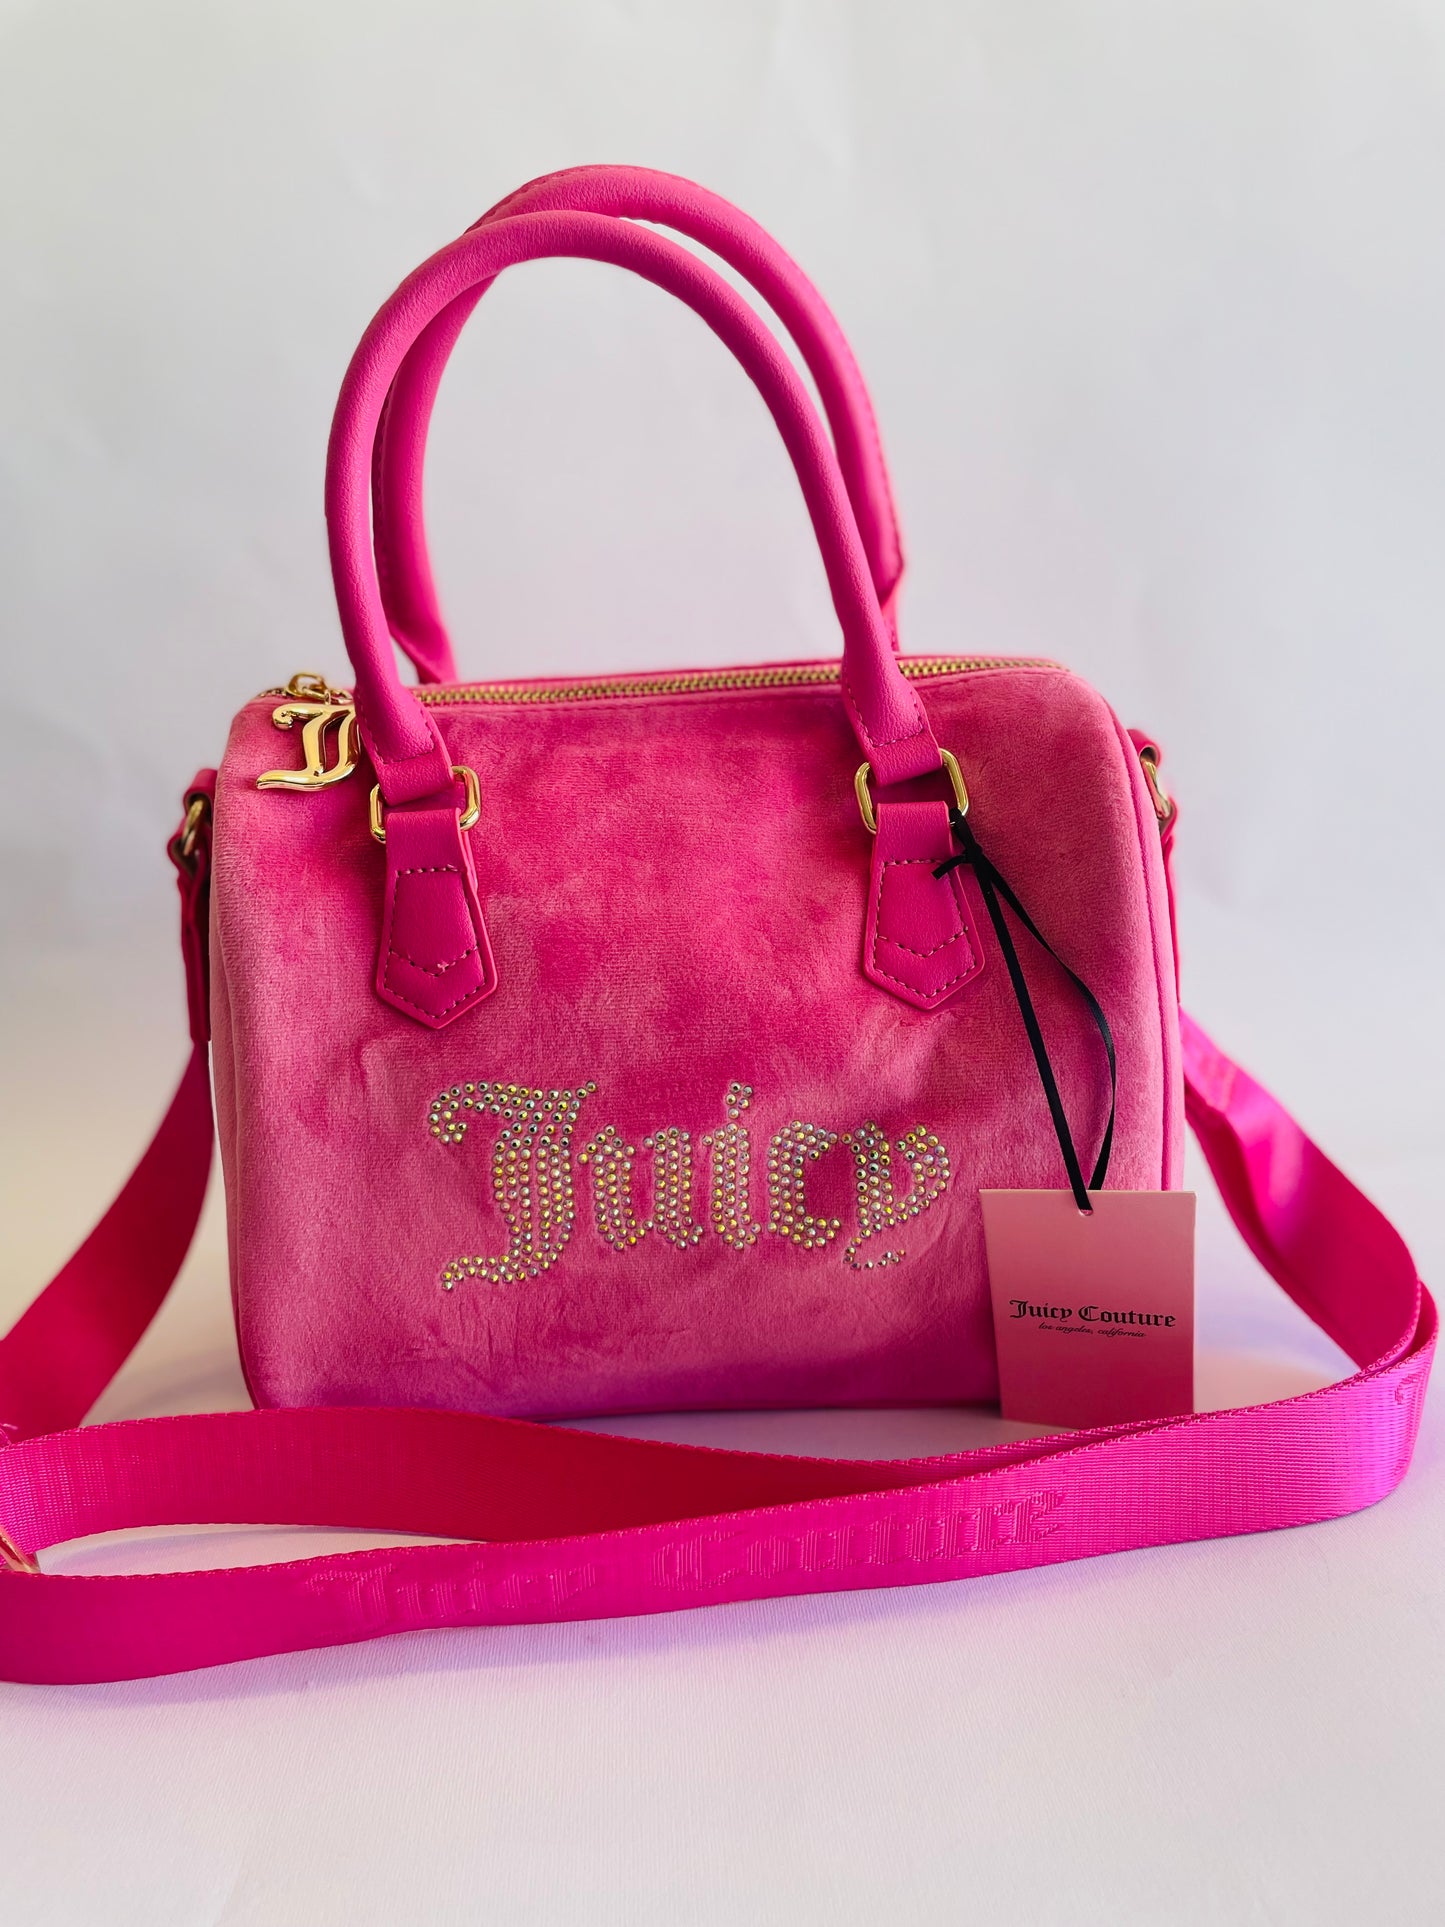 Juicy couture bag